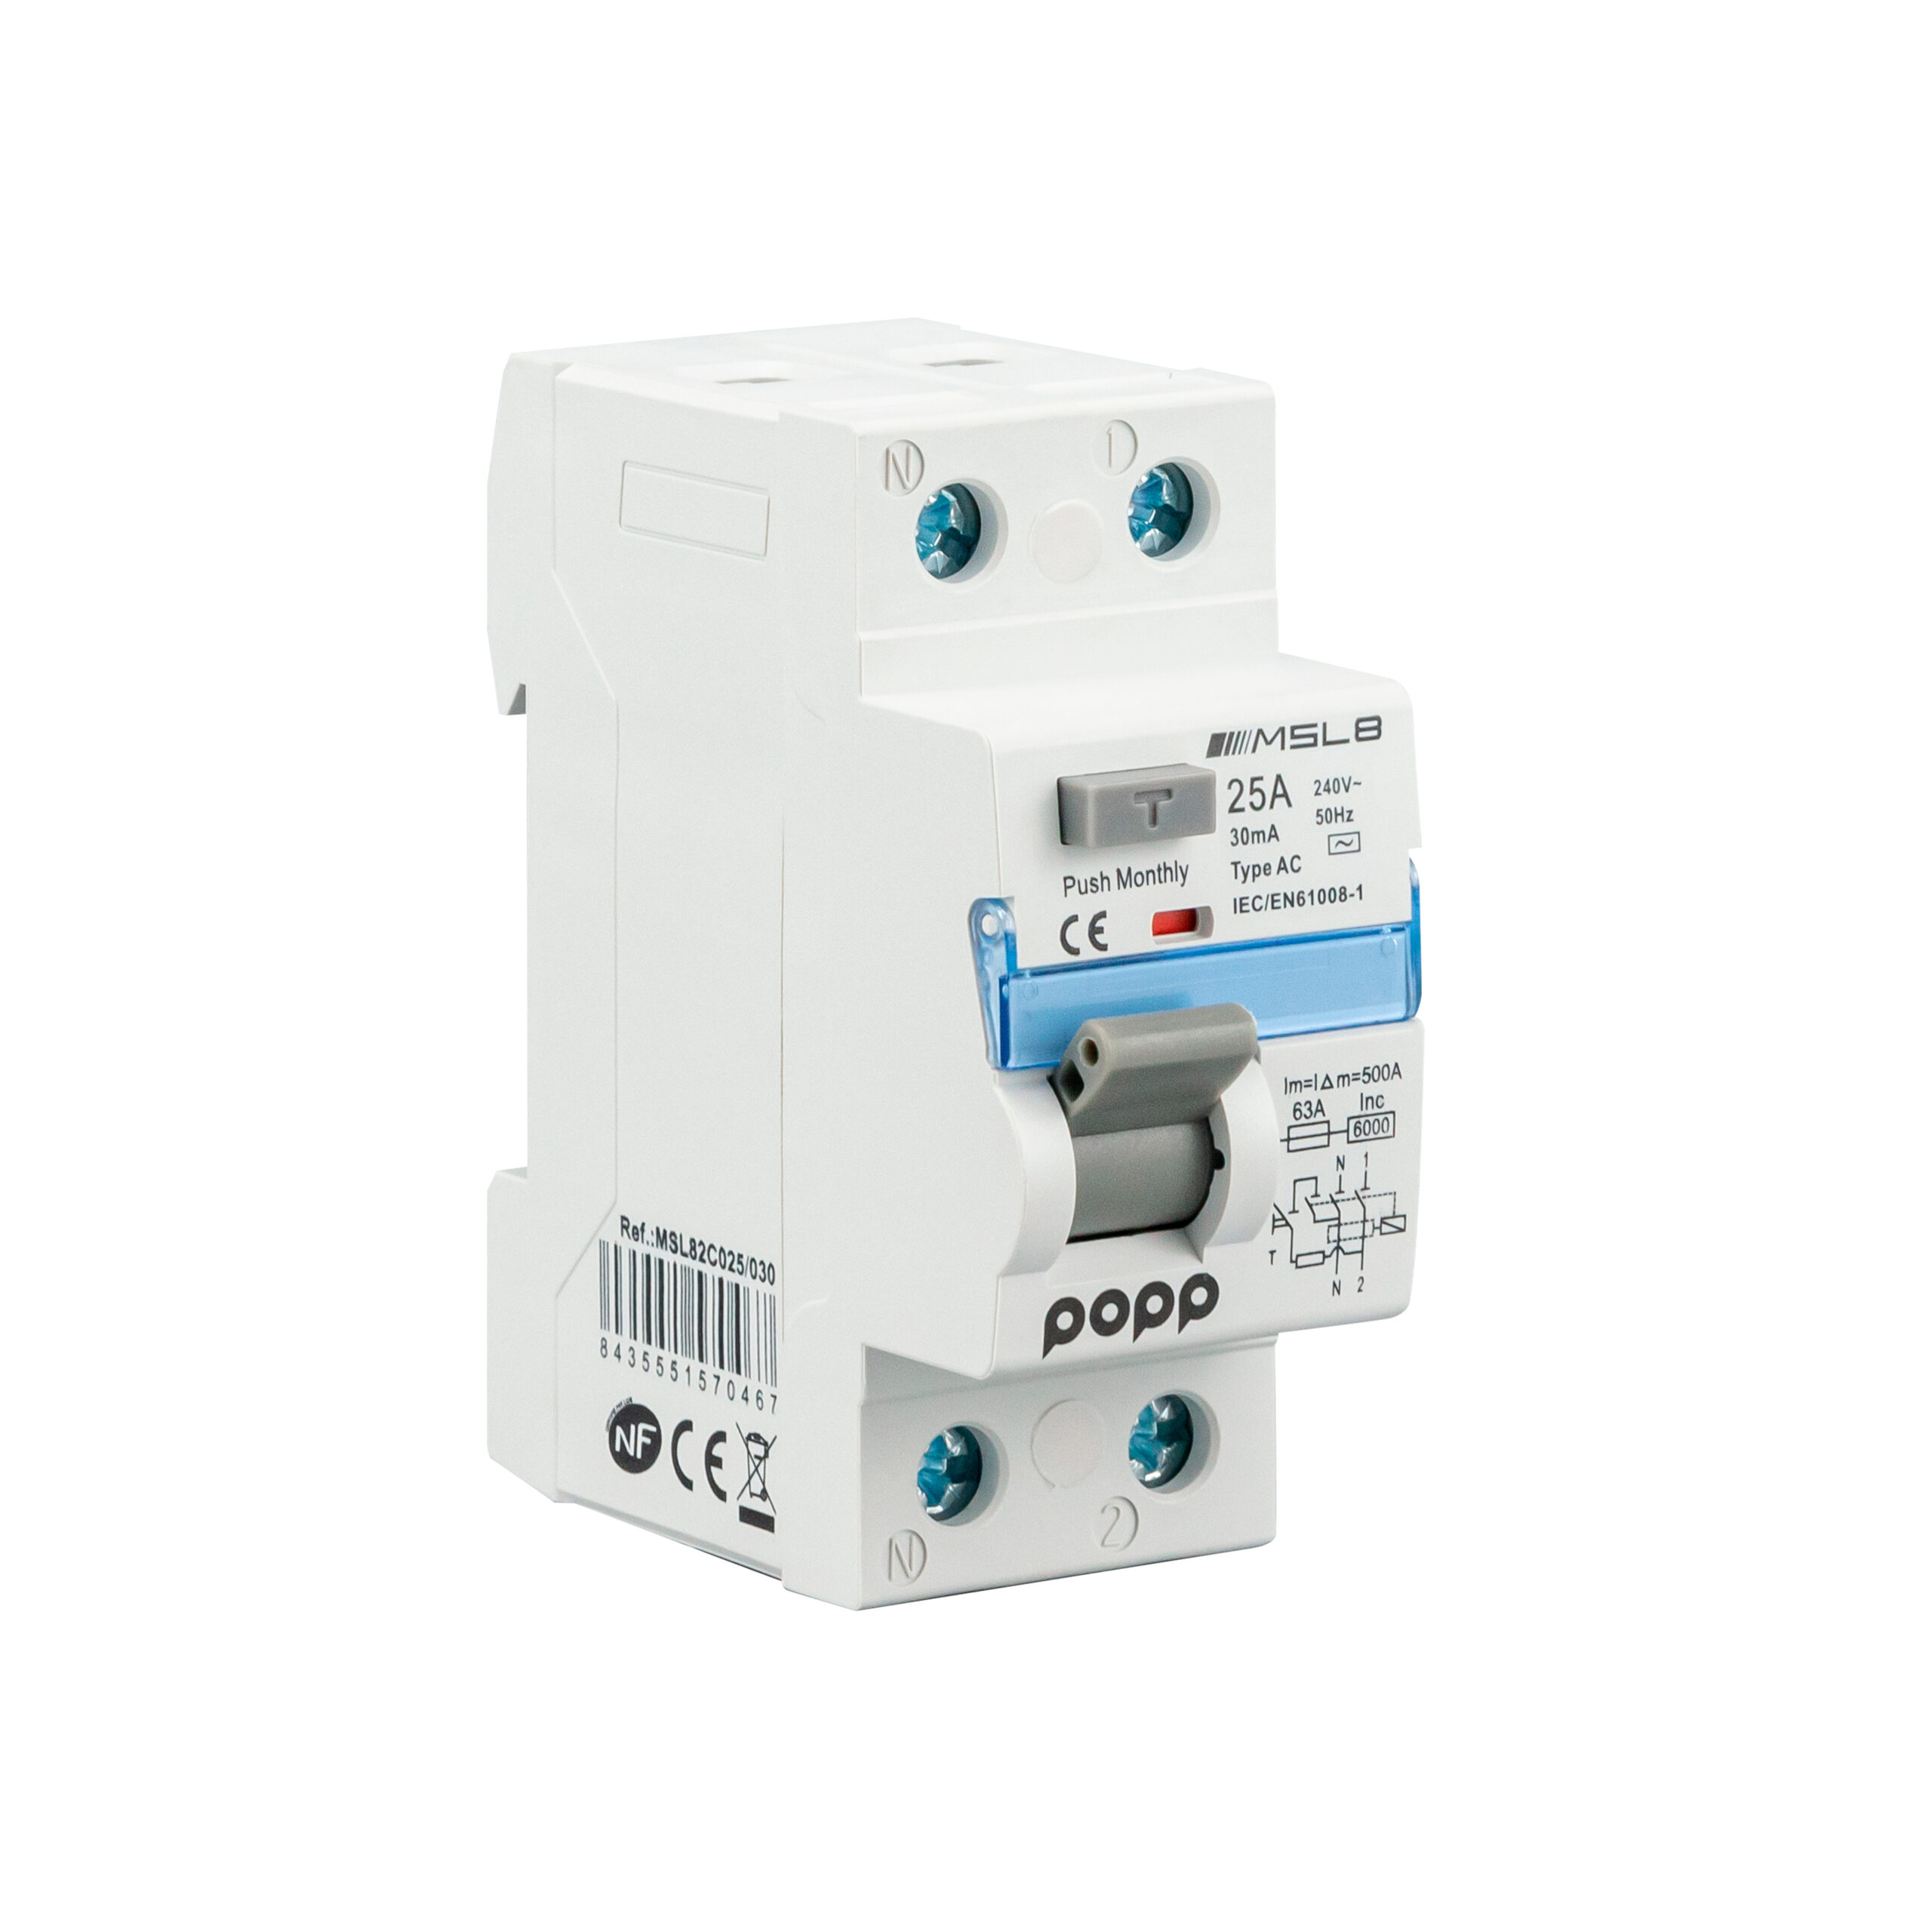 Interruptor 1P+N 25A 300mA diferencial serie MSL8 gama industrial